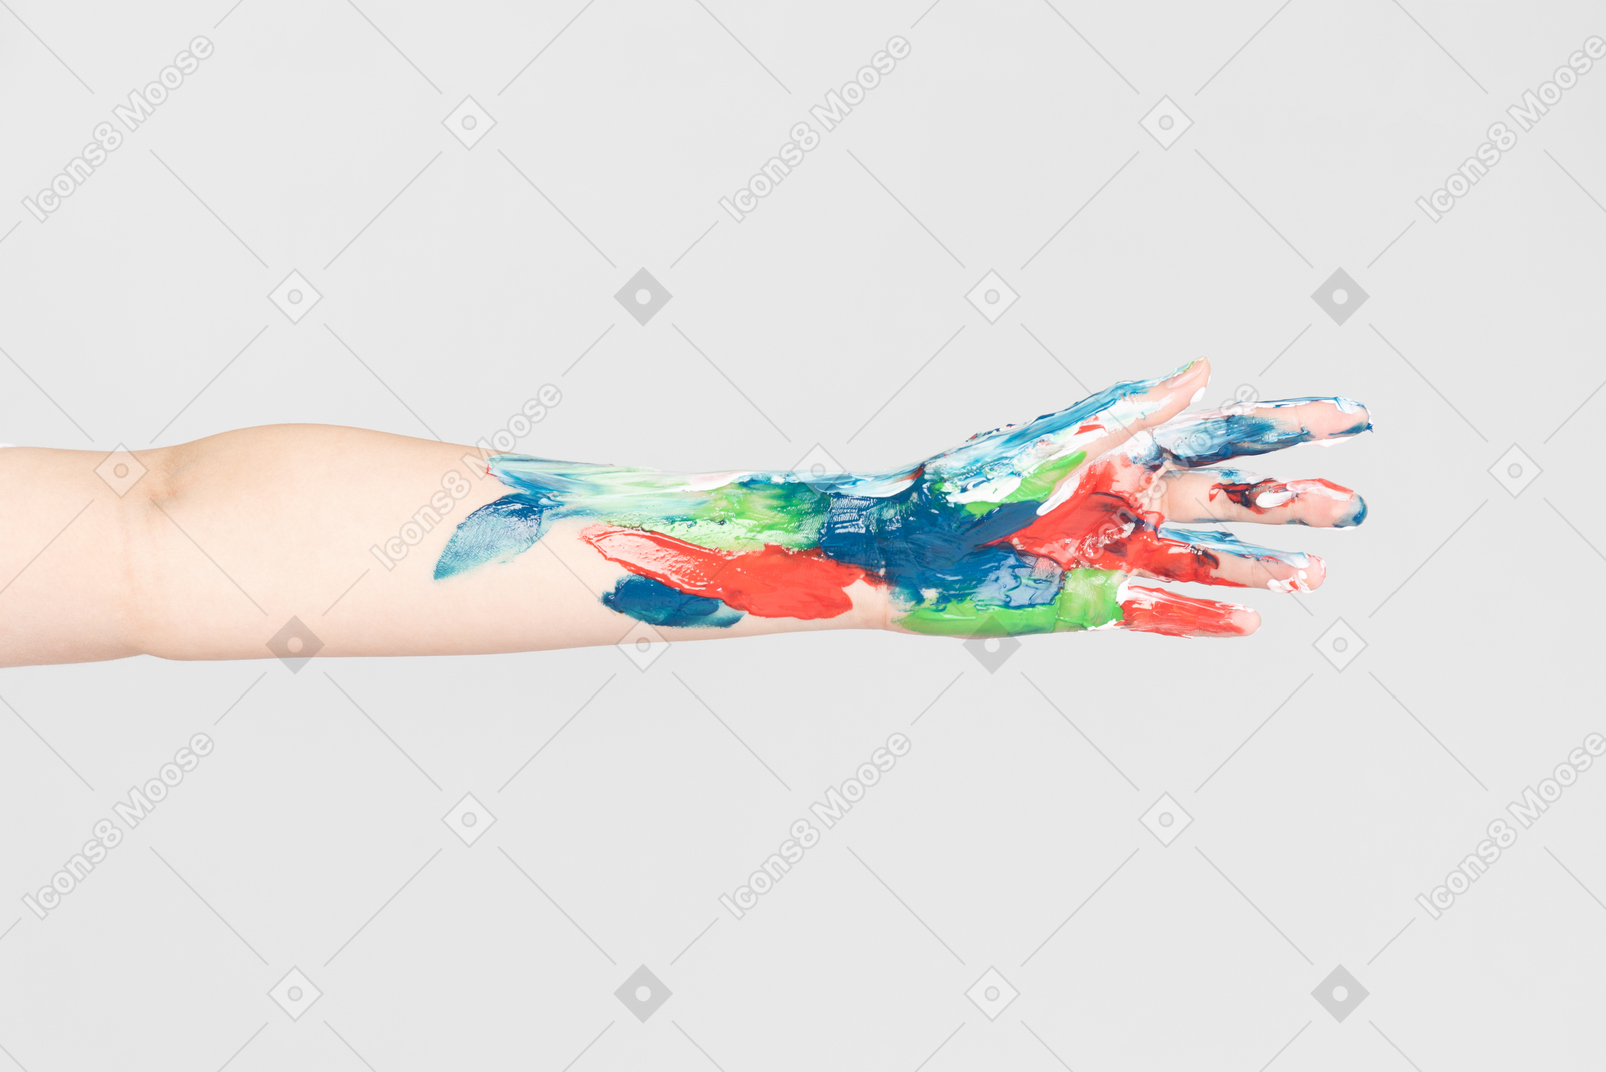 Painted female hand